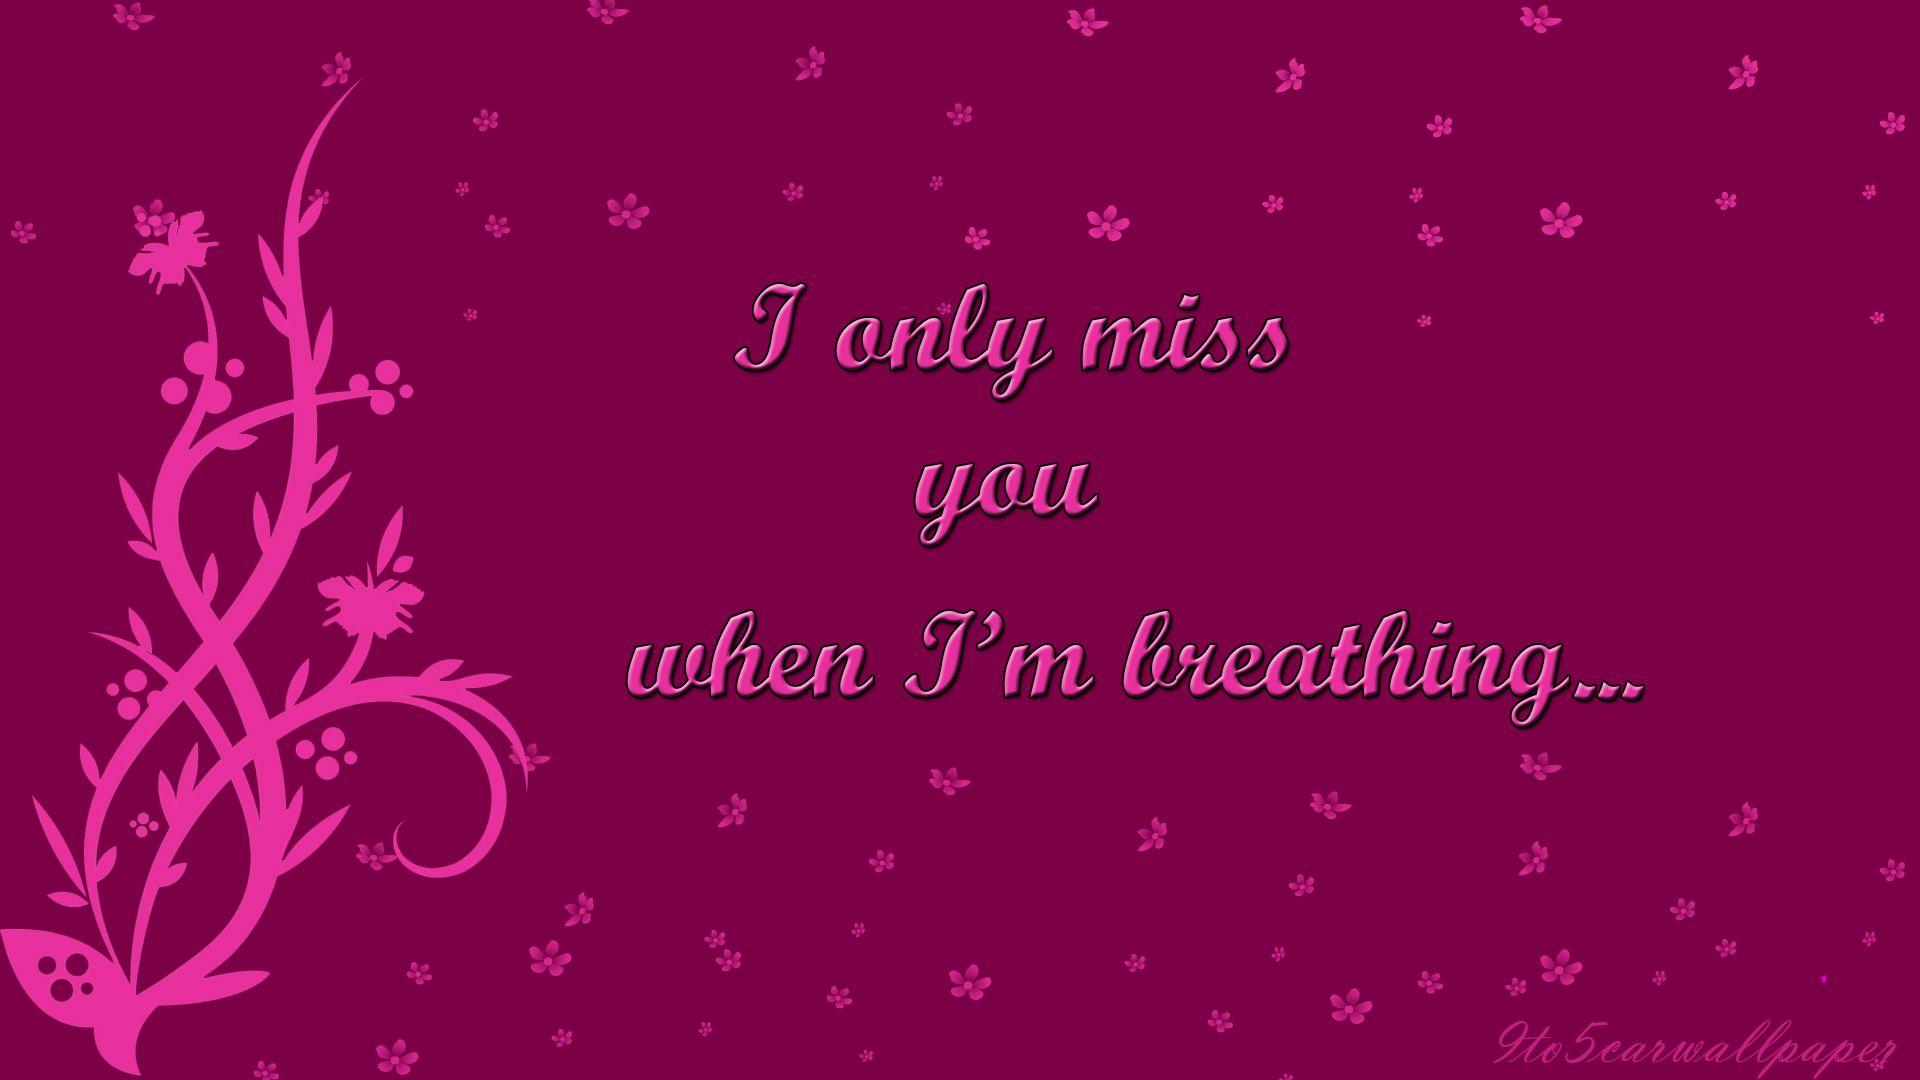 I Miss You Image, Quotes & Wallpaper